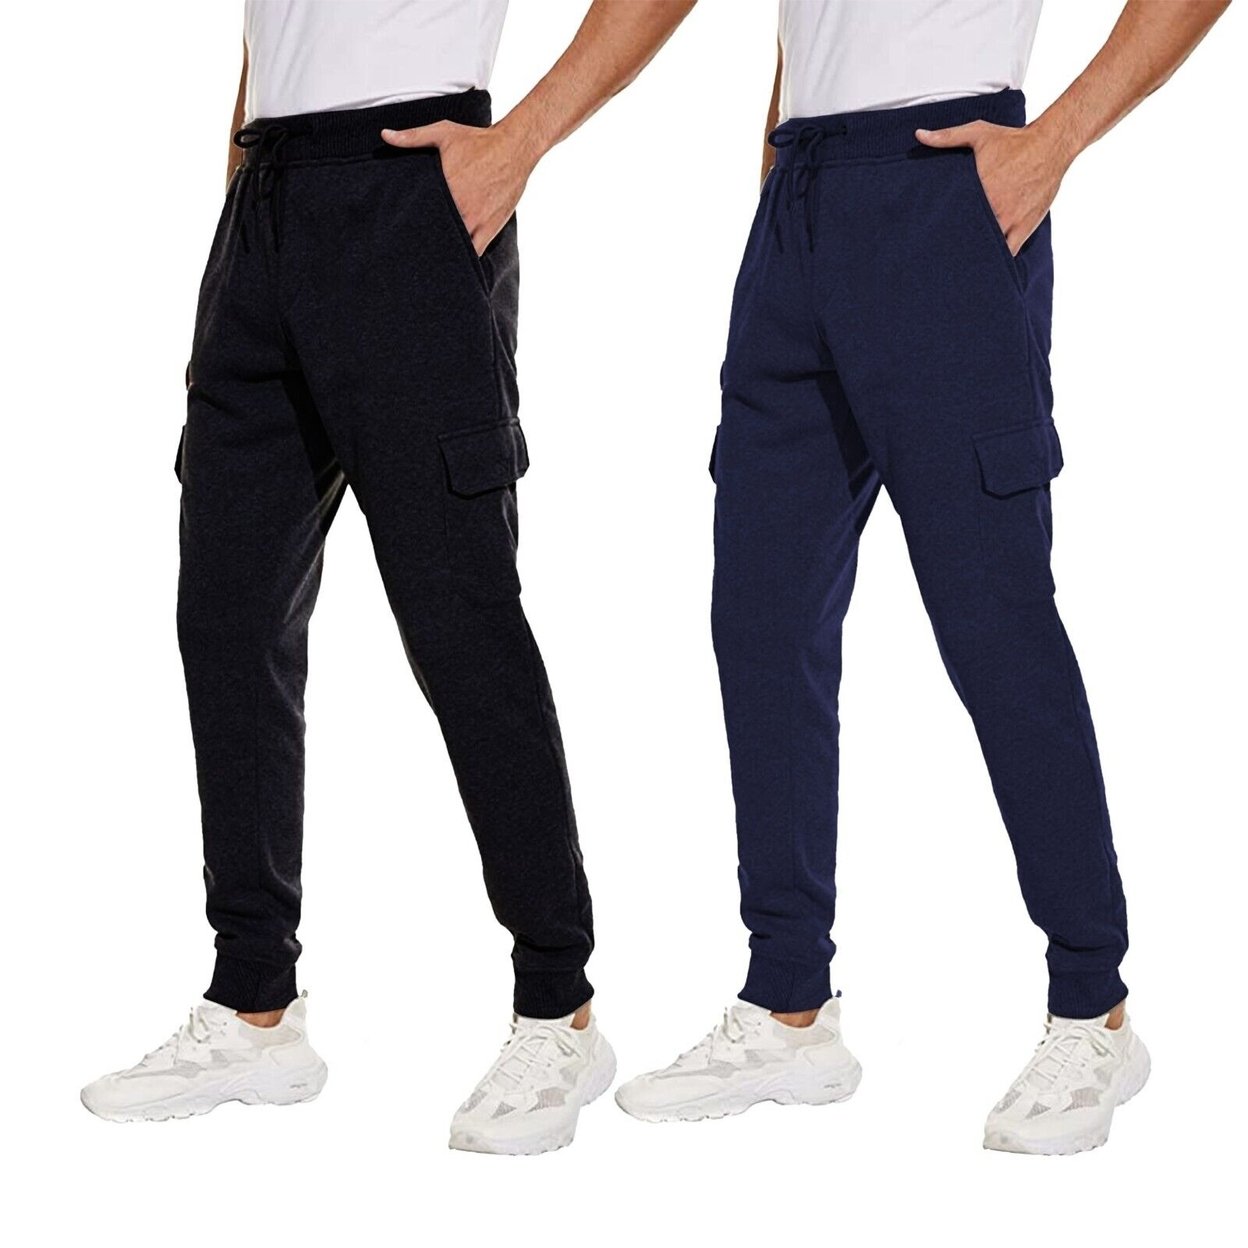 2-Pack Men's Ultra Soft Winter Warm Thick Athletic Sherpa Lined Jogger Pants - Black&navy, Large